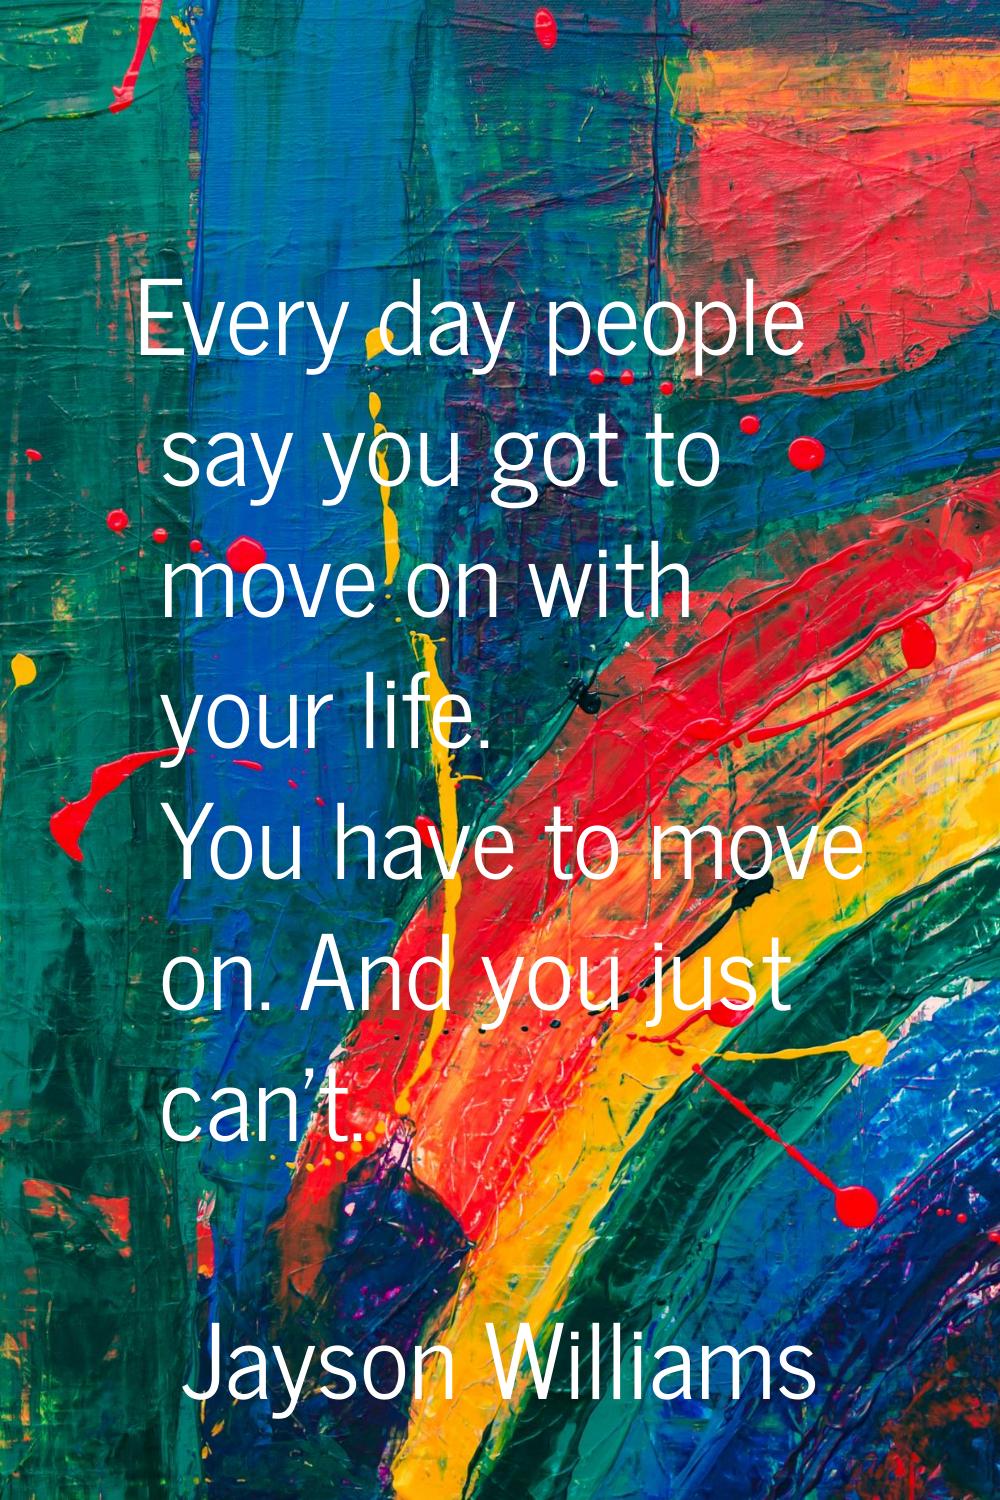 Every day people say you got to move on with your life. You have to move on. And you just can't.